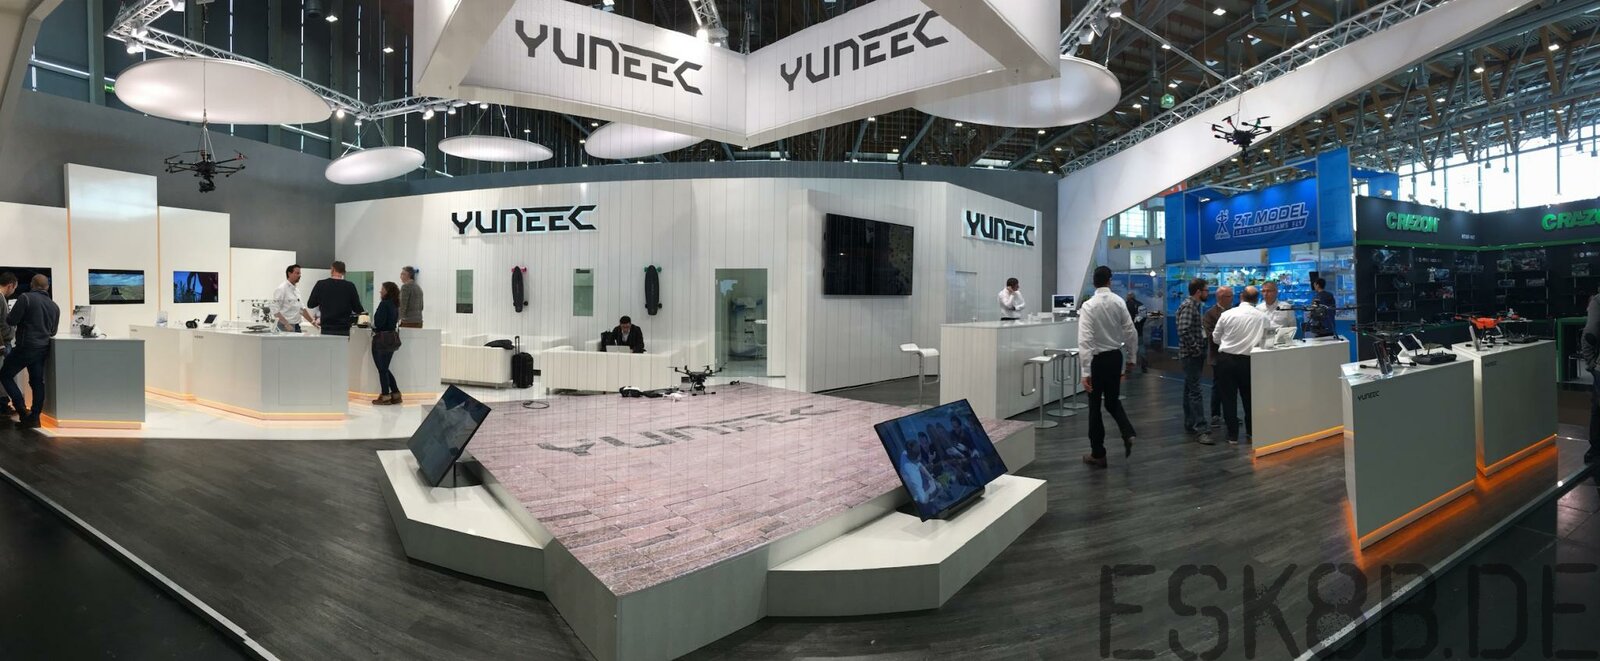 yuneec Stand